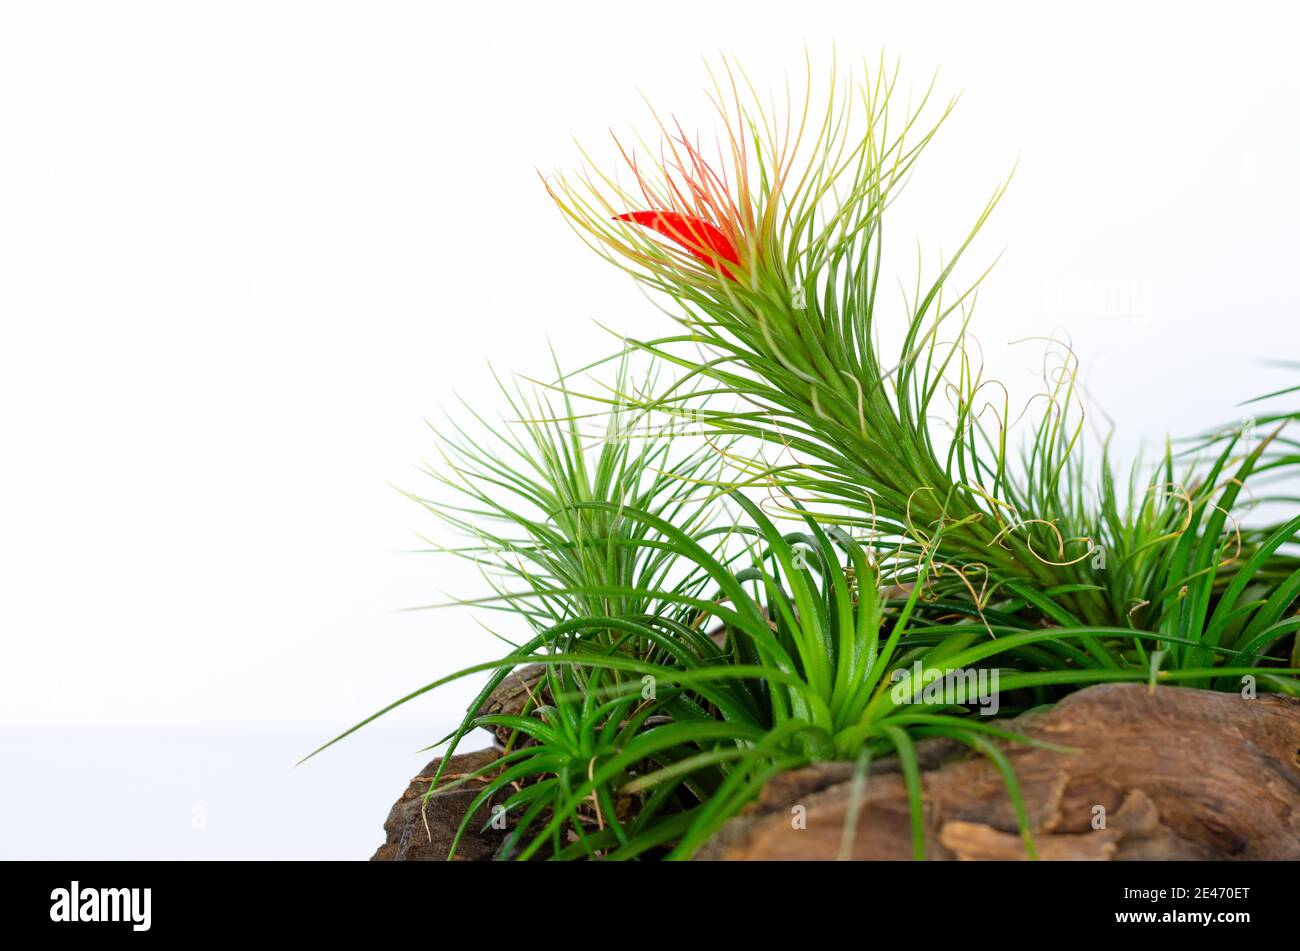 Air plant - Tillandsia funckiana with red color flower plant in wooden log. Stock Photo